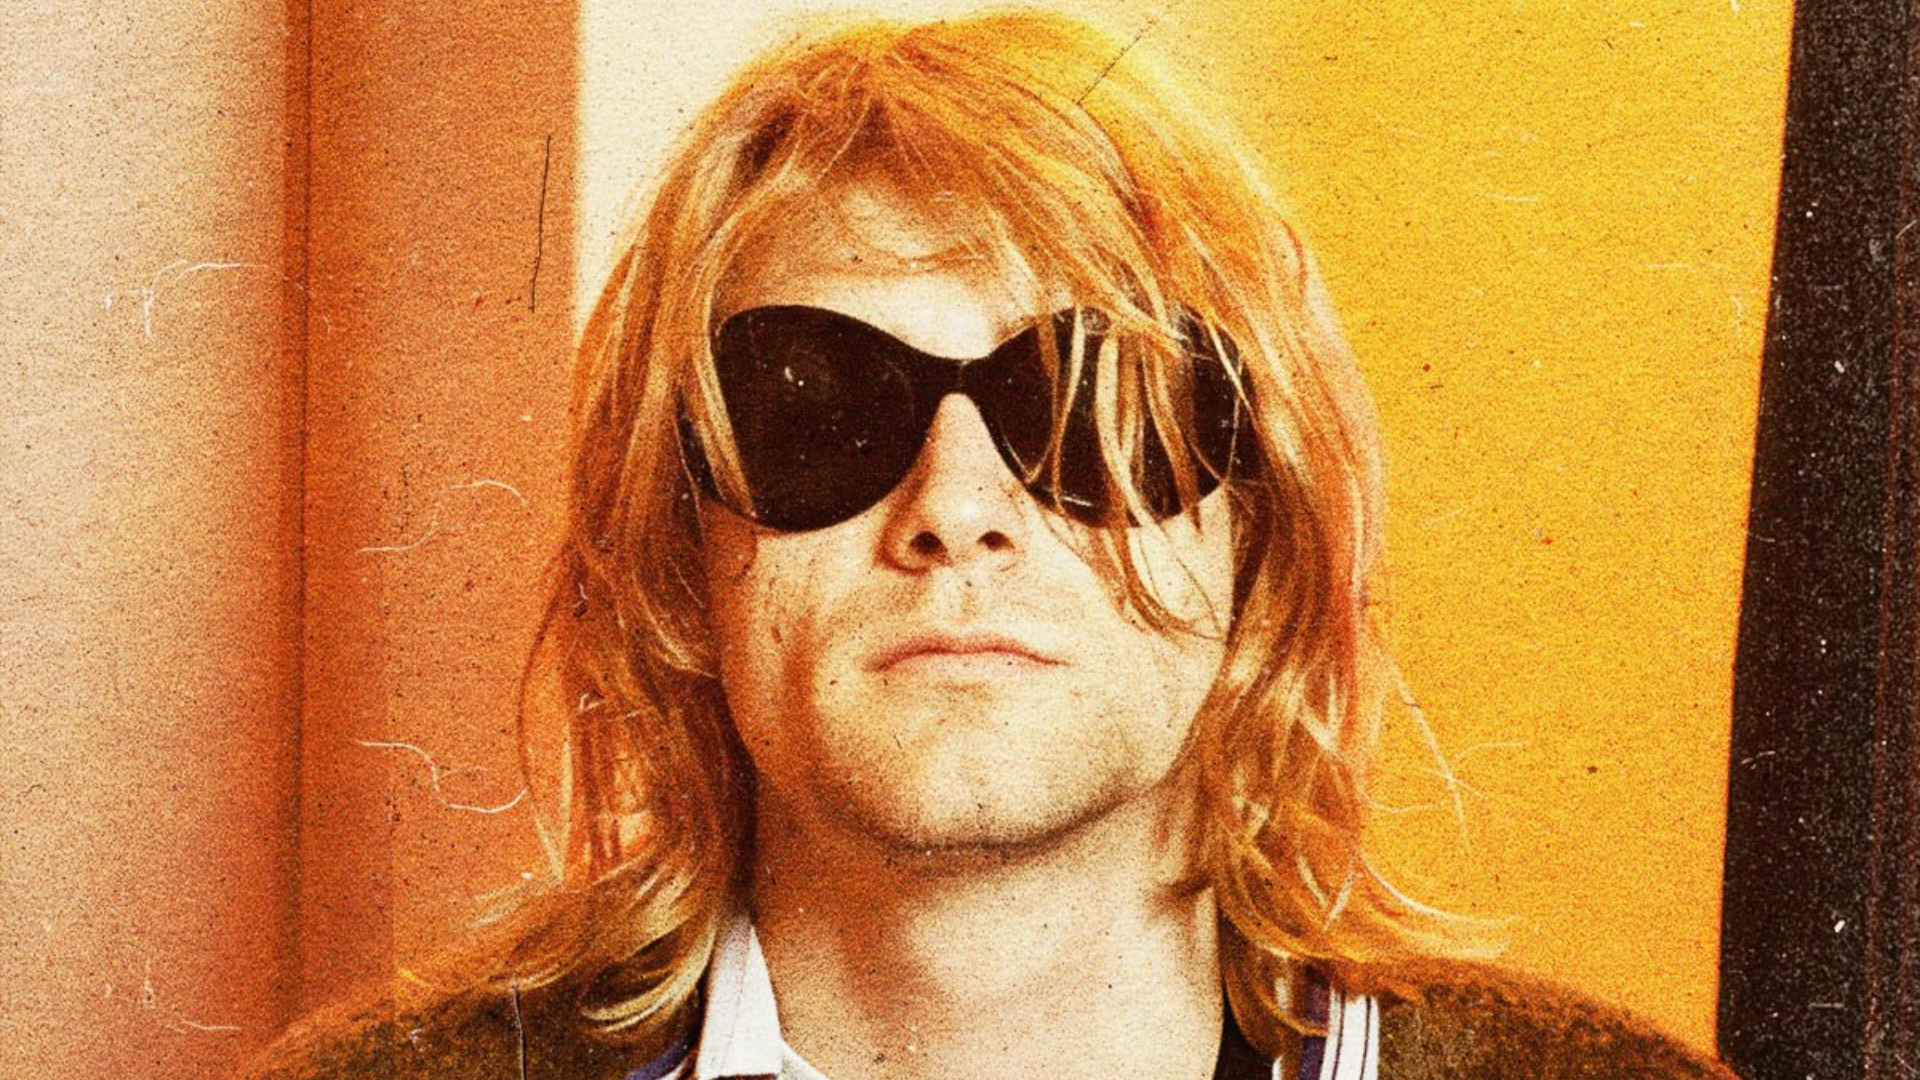 How Did Kurt Cobain Die? A Documentary Filmmaker Once Made A Shocking Claim Regarding Singer’s Untimely Death